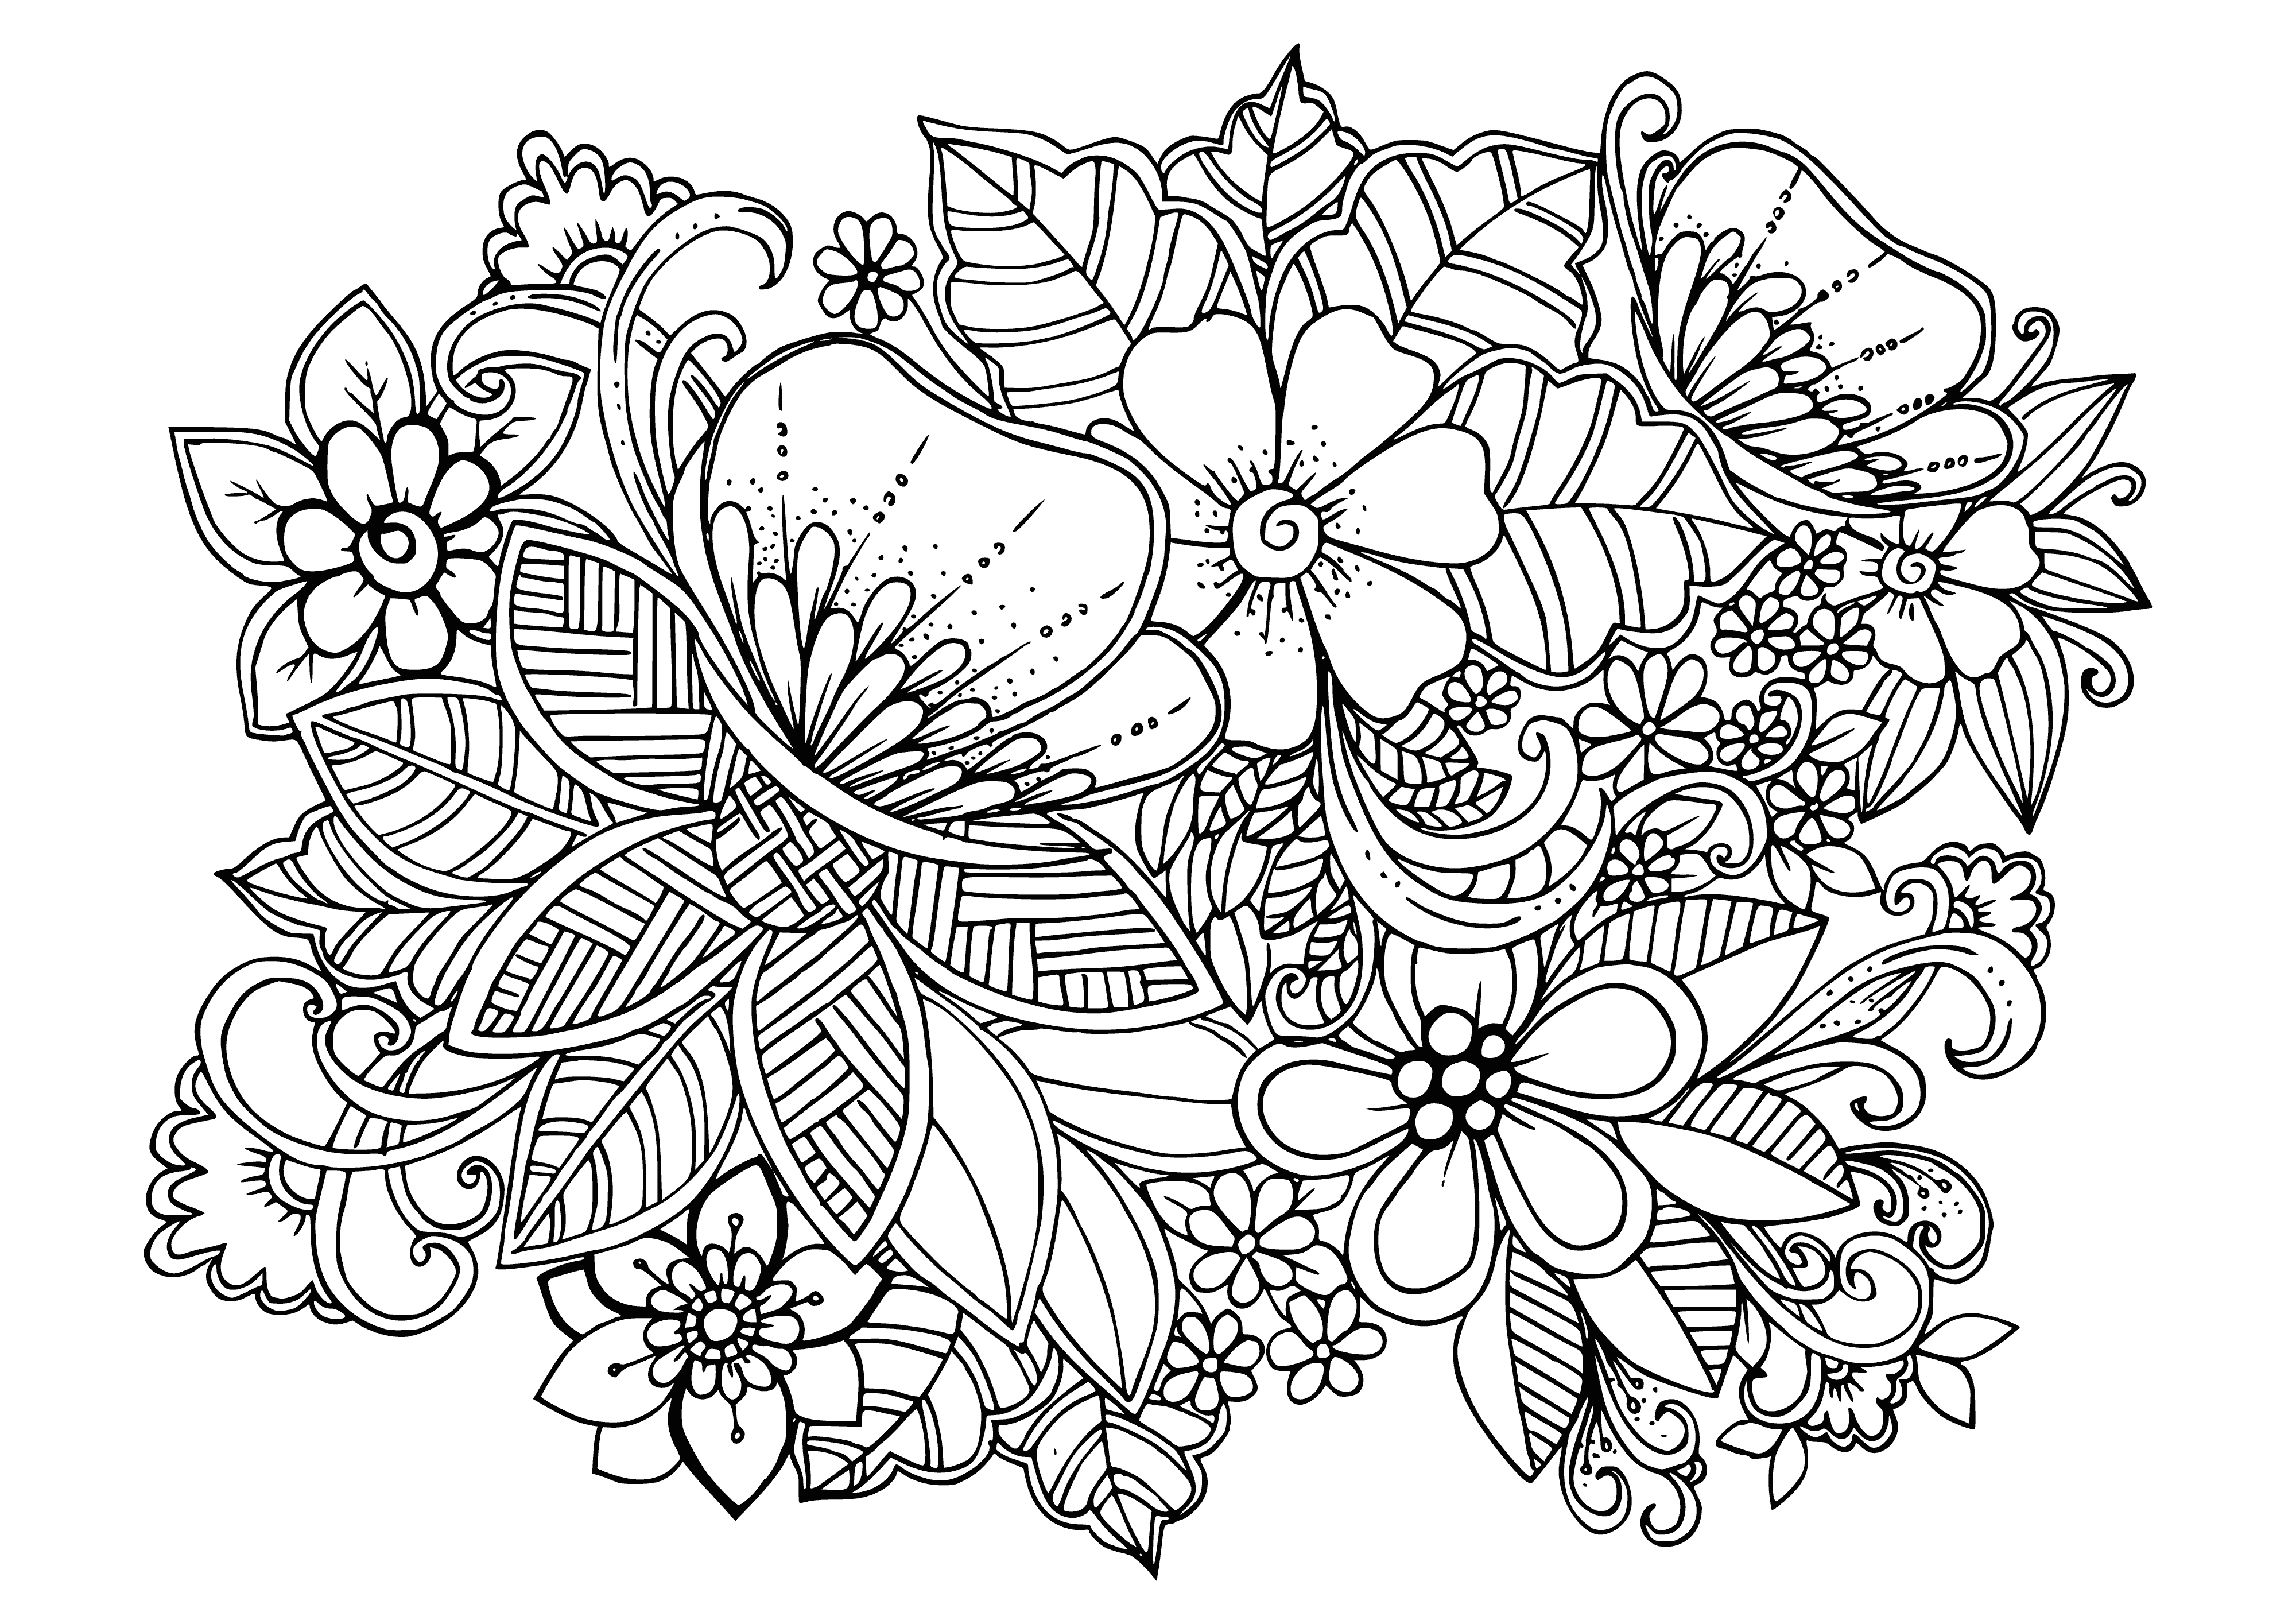 coloring page: A coloring page of different colored flowers in a field, with a blue sky.